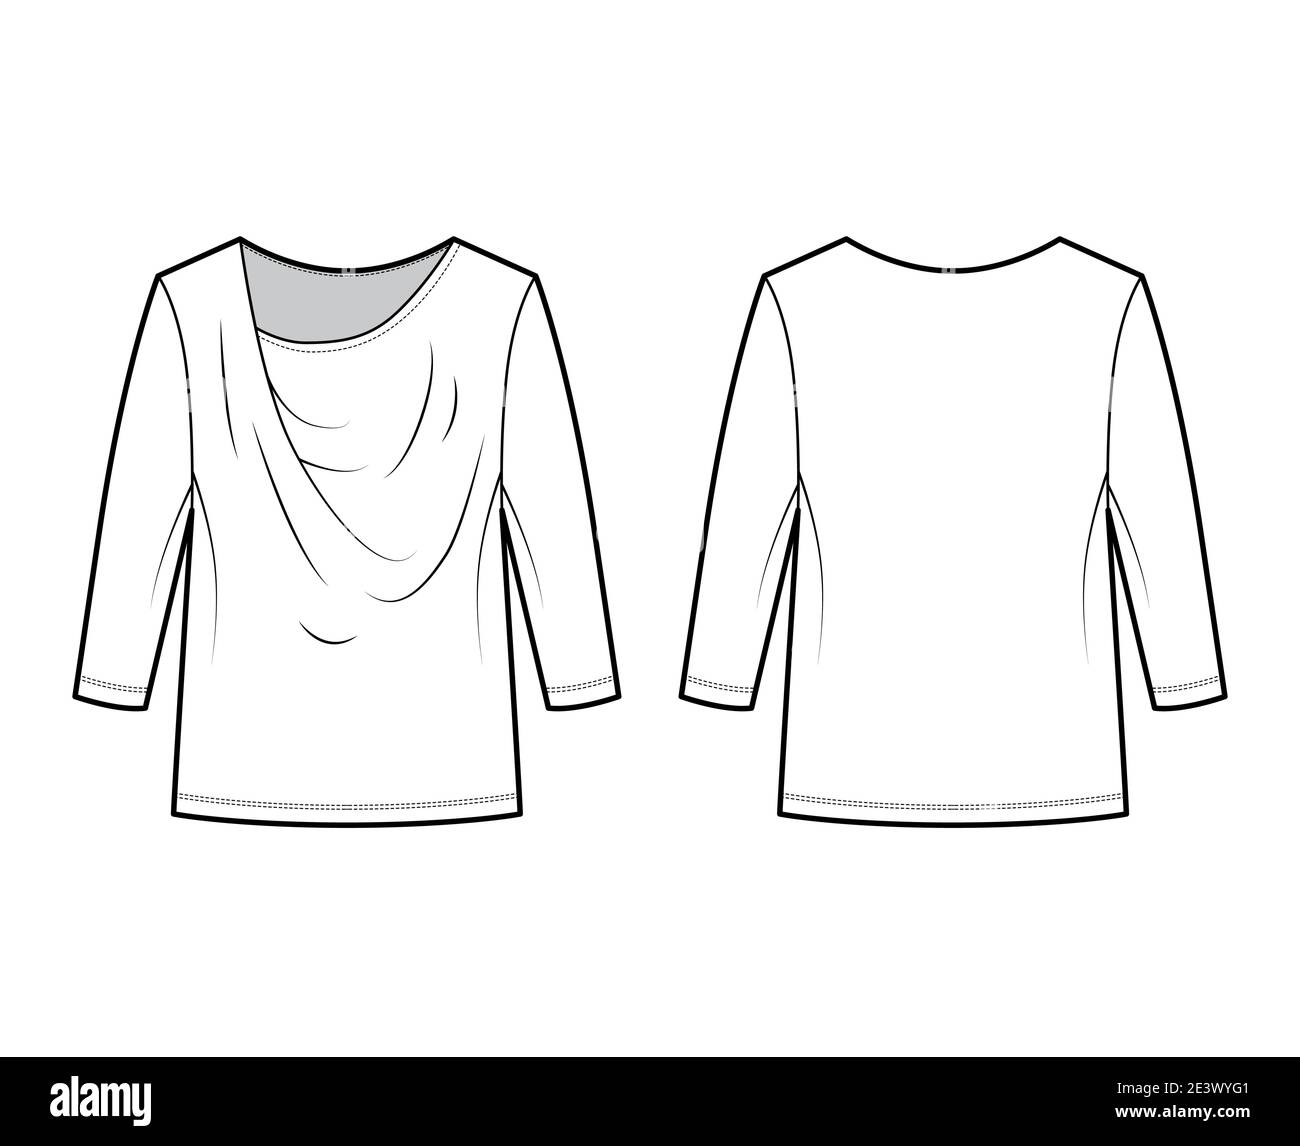 T-Shirt draped technical fashion illustration with long sleeves, tunic length, oversized. Apparel blouse top outwear template front, back, white color. Women men unisex CAD mockup Stock Vector